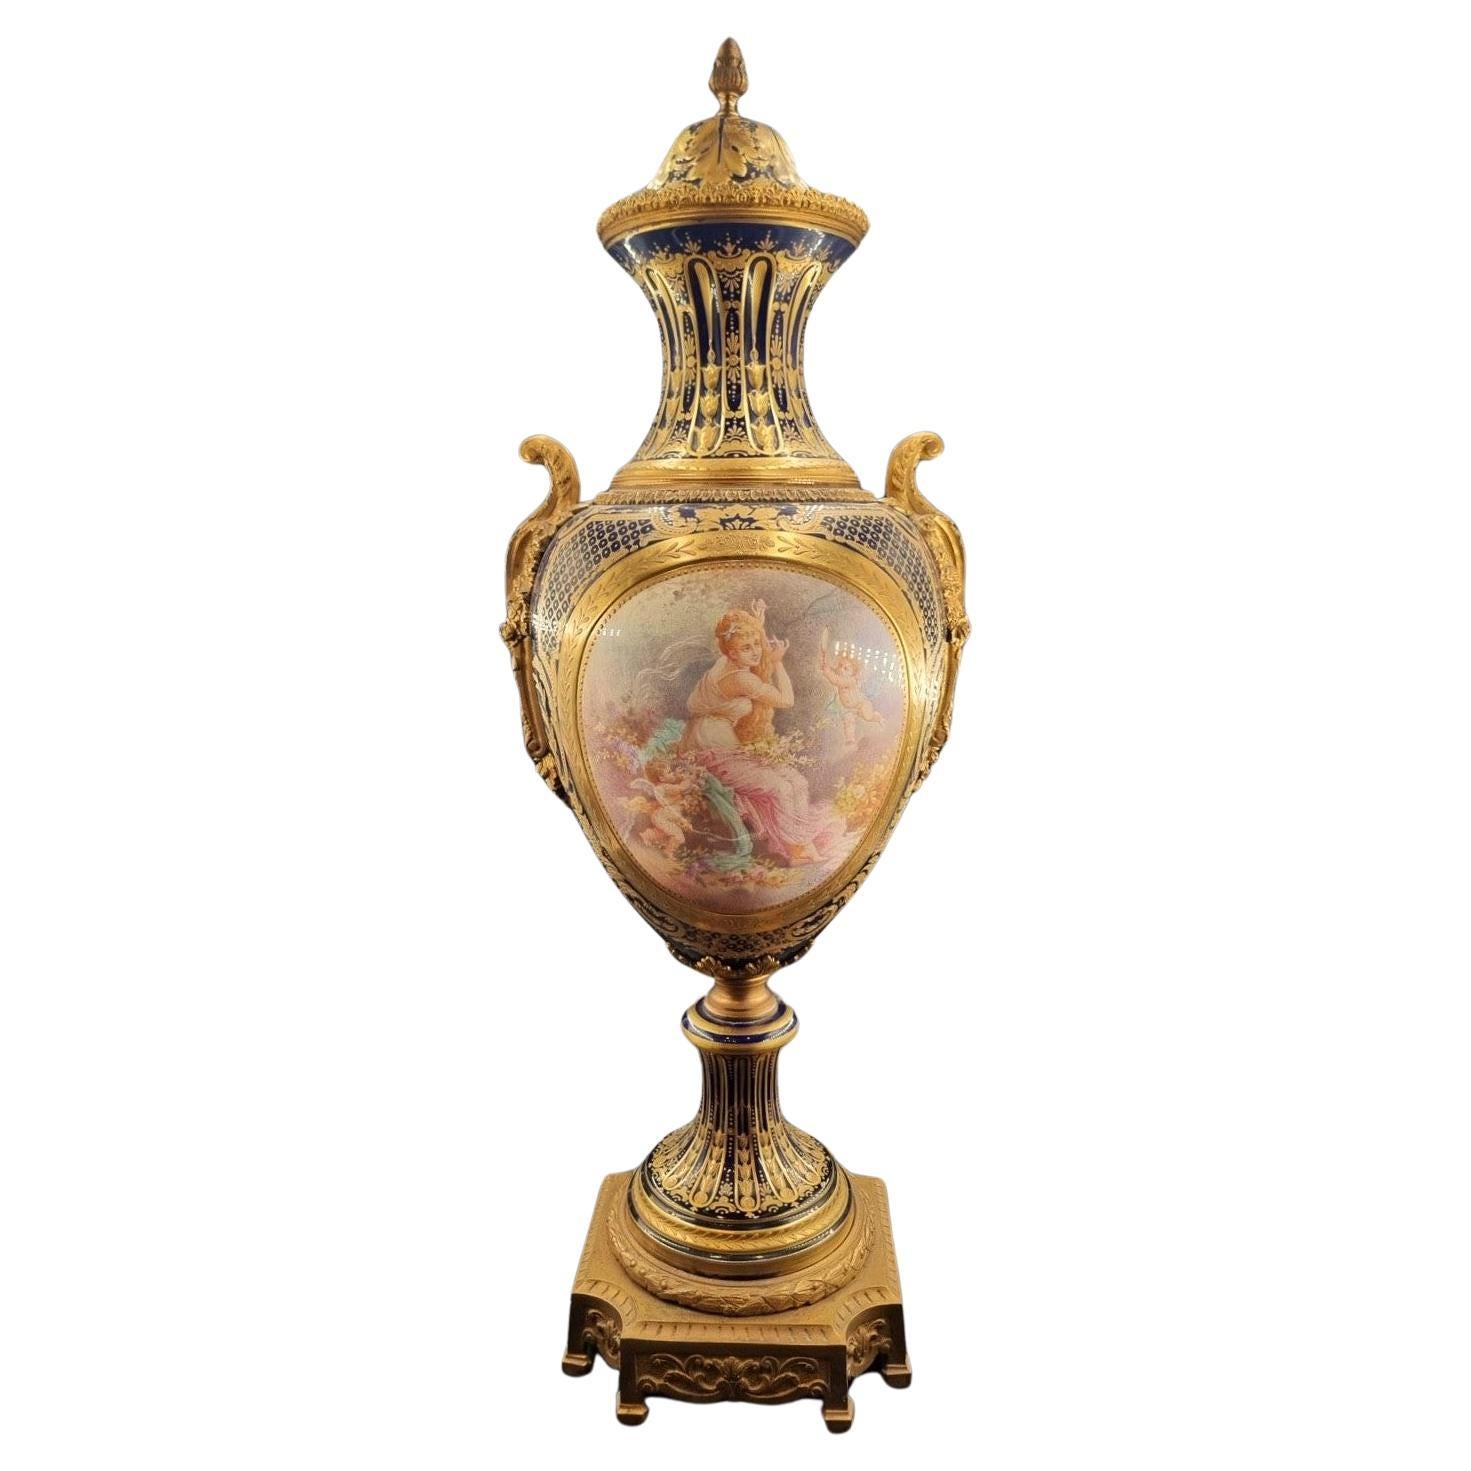 EXCEPTIONAL FINE SÈRVERS FRENCH ANTIQUE PORCELAIN AND ORMOLU VASE, 19th CENTURY